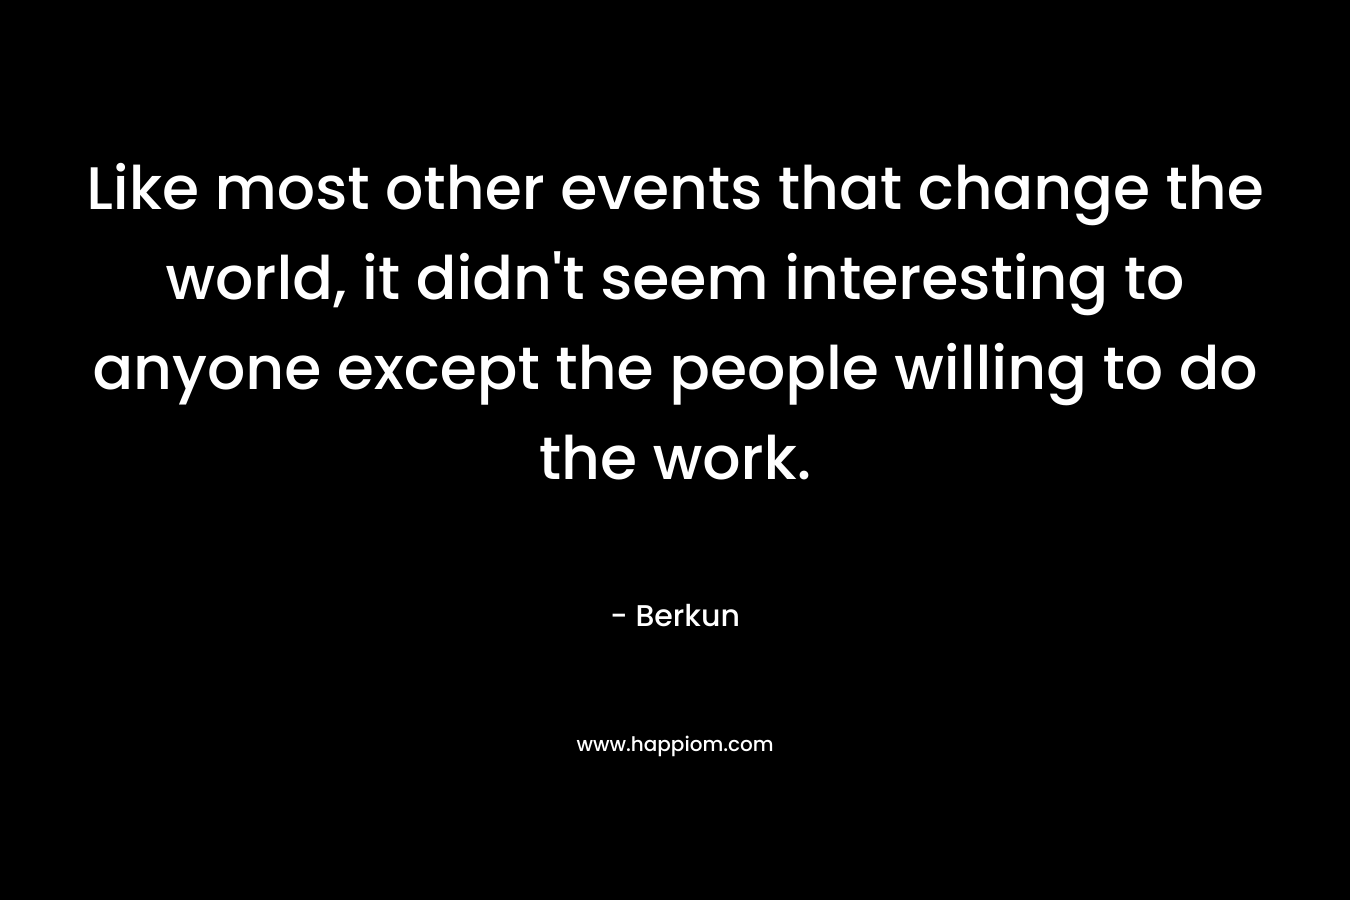 Like most other events that change the world, it didn’t seem interesting to anyone except the people willing to do the work. – Berkun